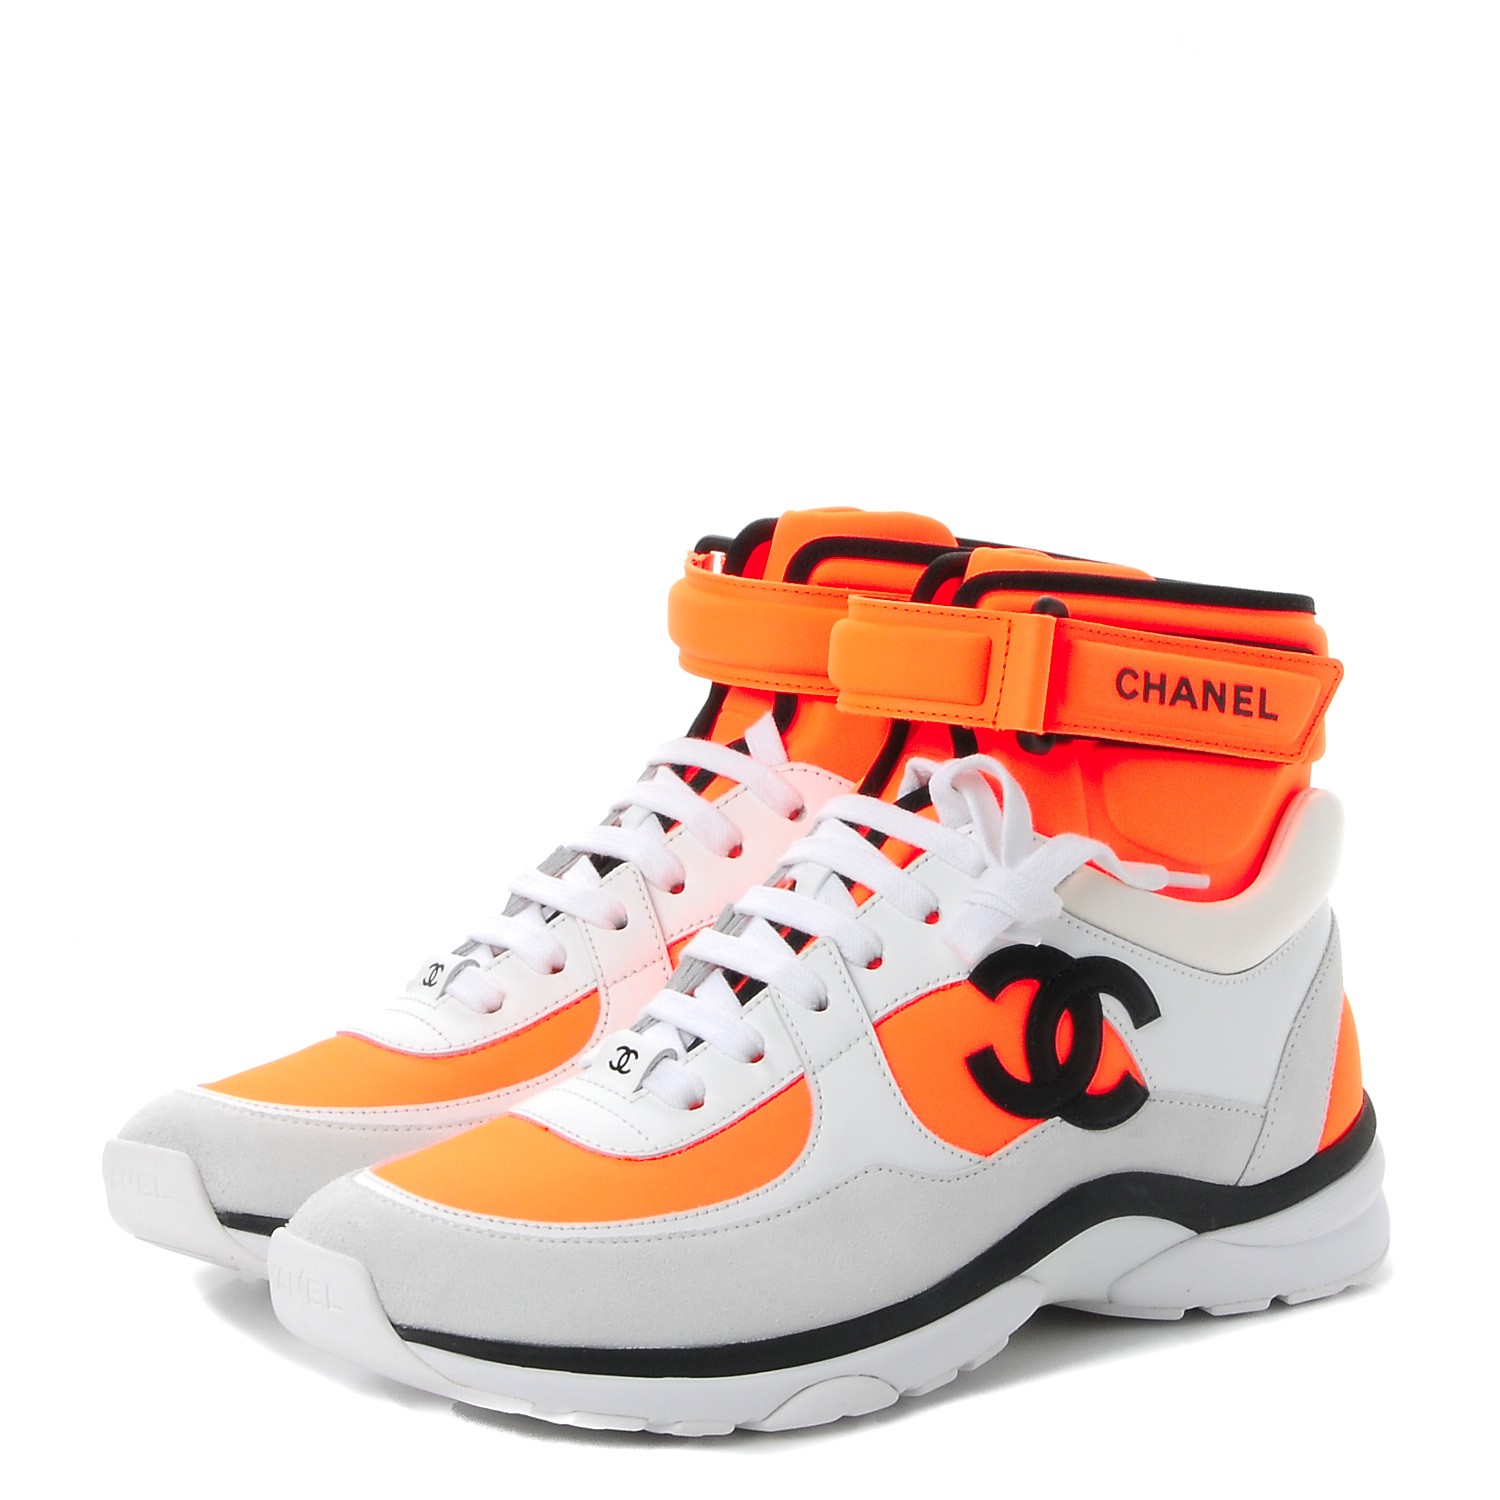 chanel sneakers white and orange